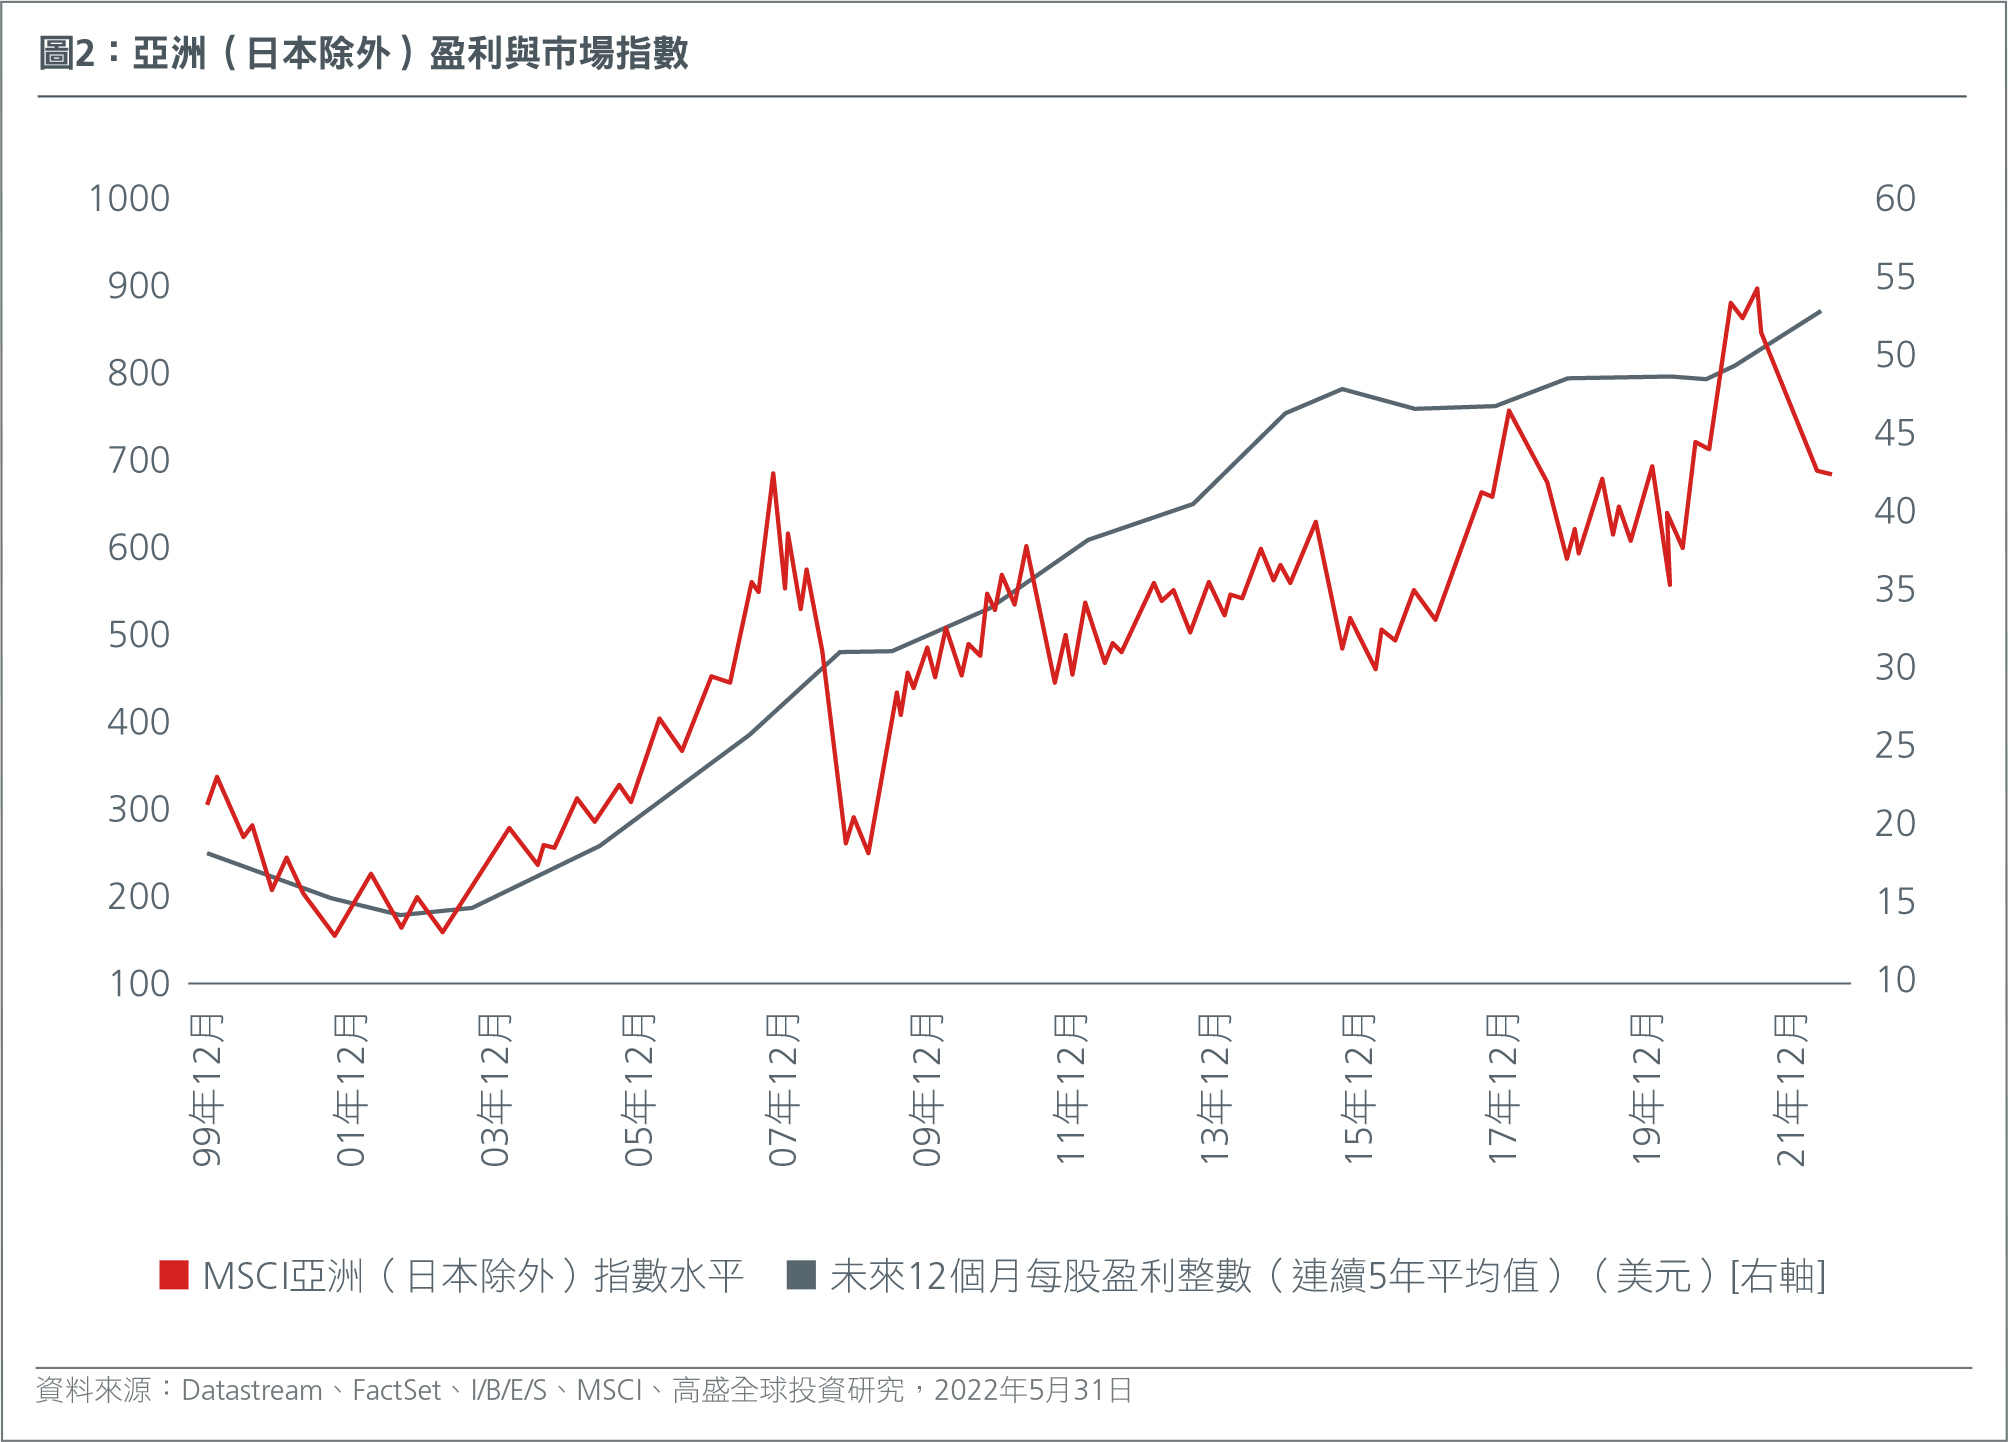 hk-ch-asian-equities-low-expectations-attractive-valuations-fig2